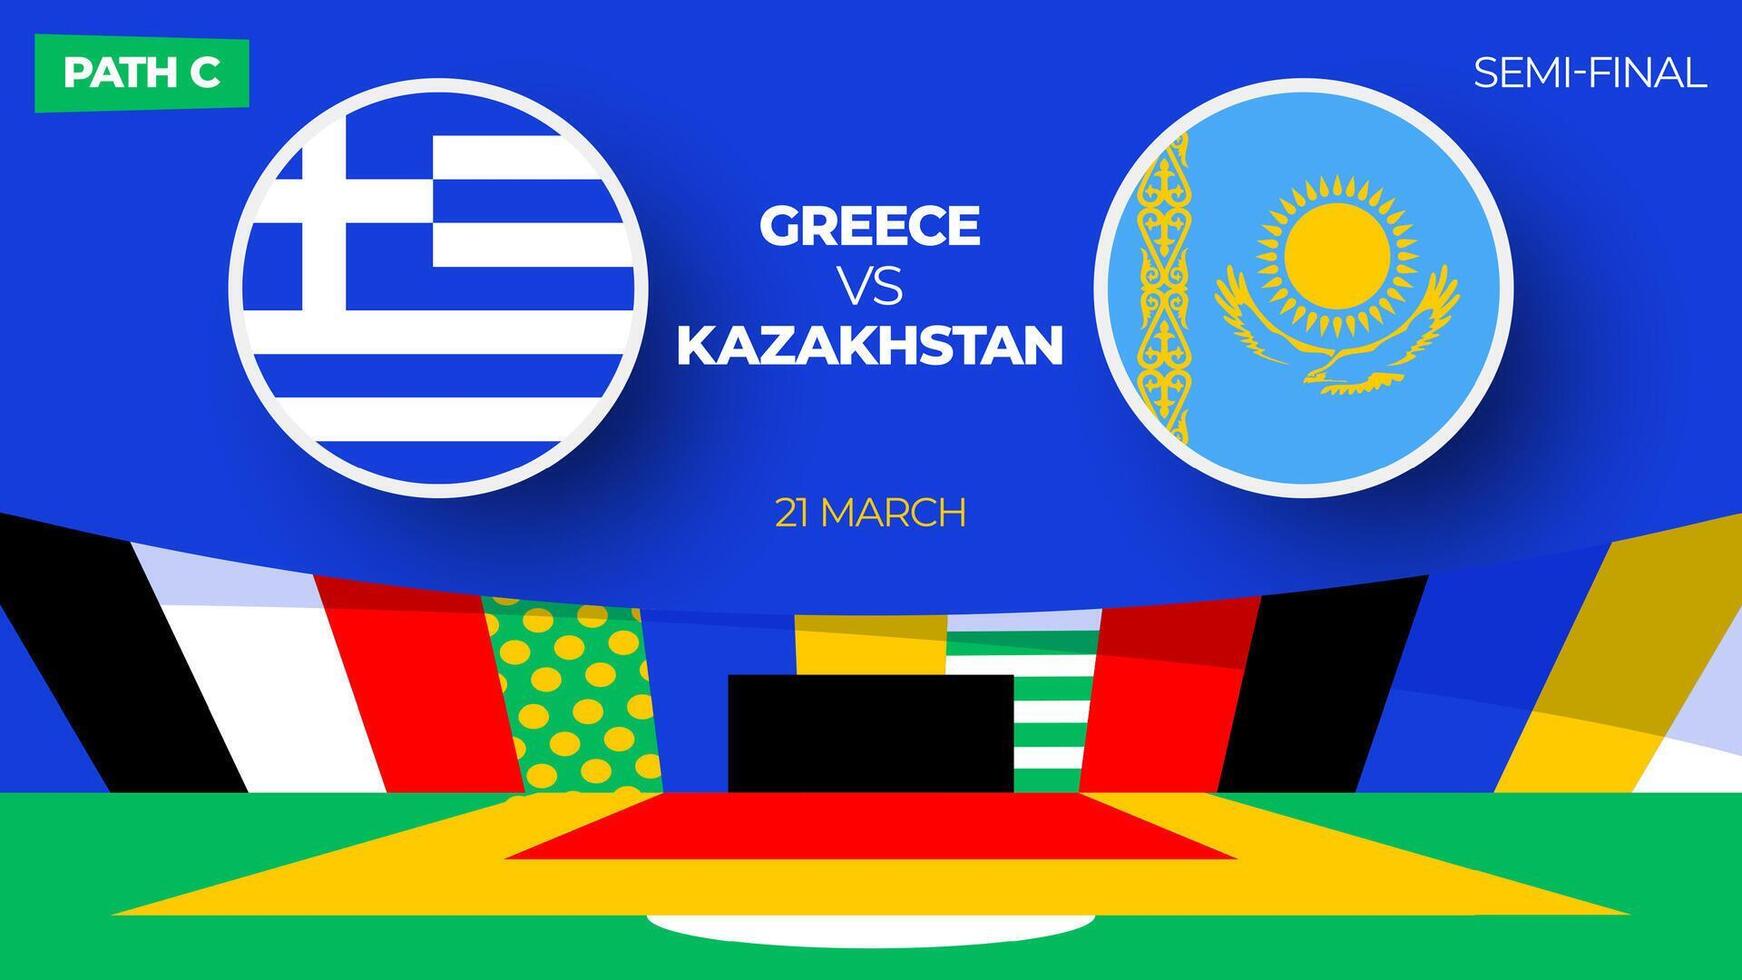 Greece vs Kazakhstan football 2024 match. Football 2024 playoff championship match versus teams intro sport background, championship competition final poster, flat style vector illustration